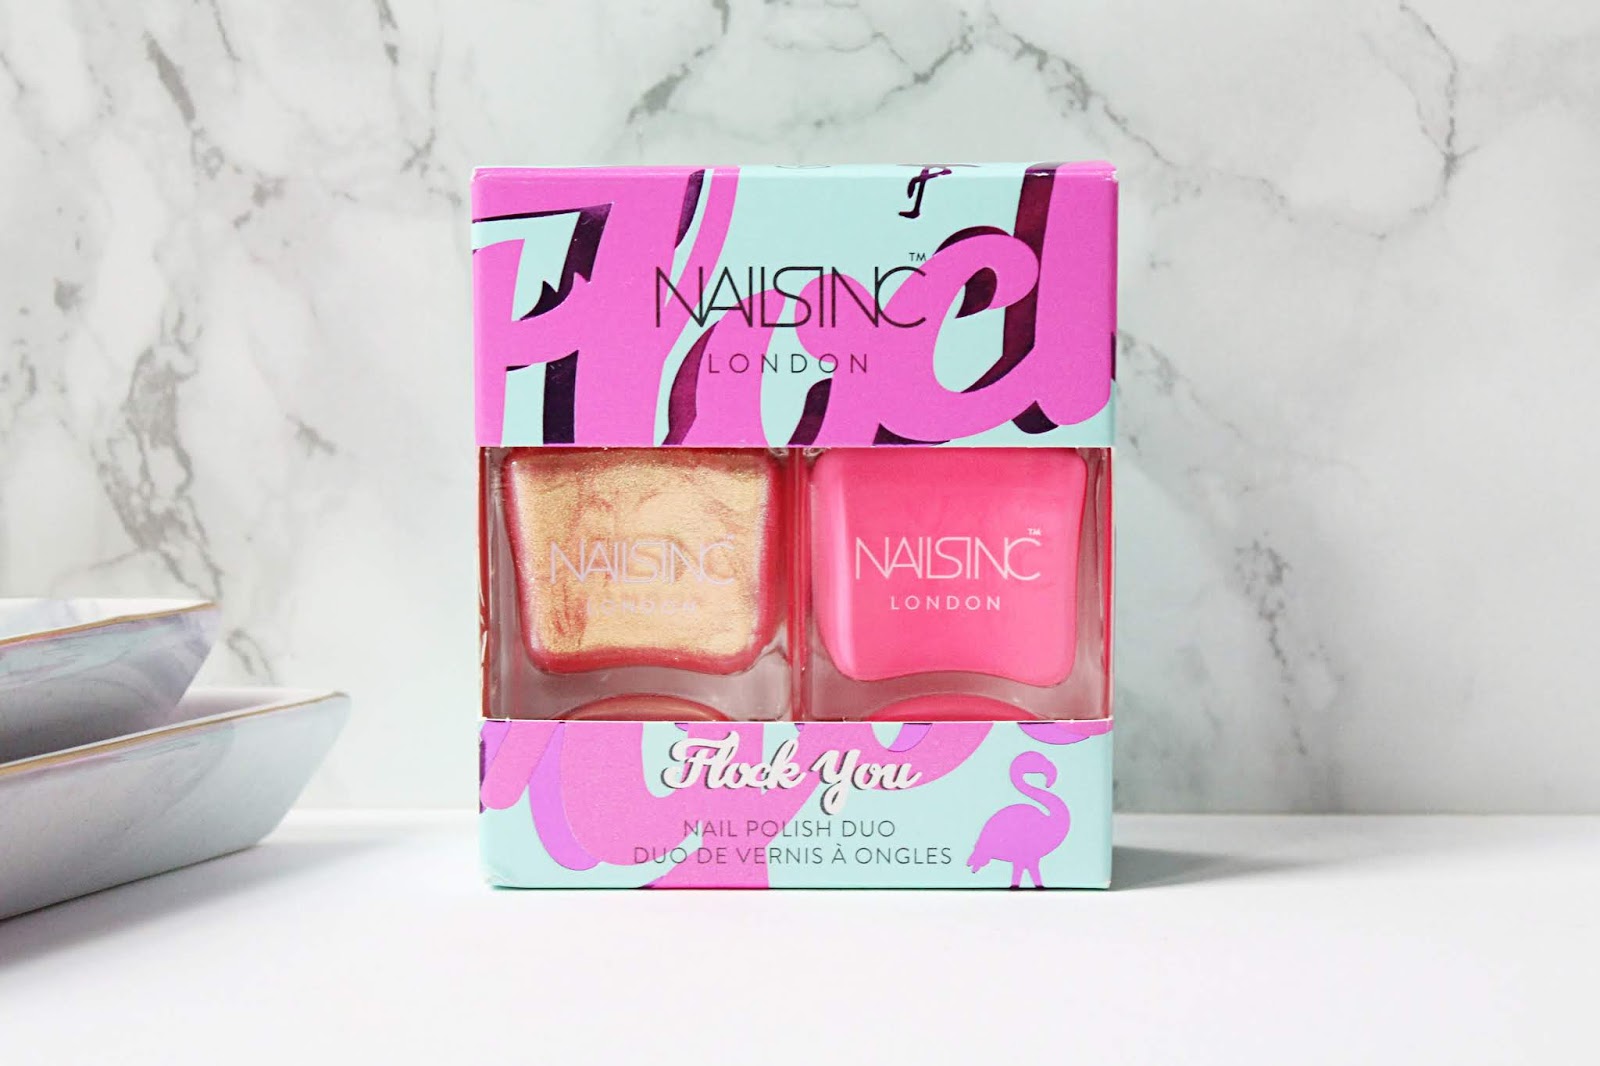 Nails Inc Flock You Duo Review & Swatches 